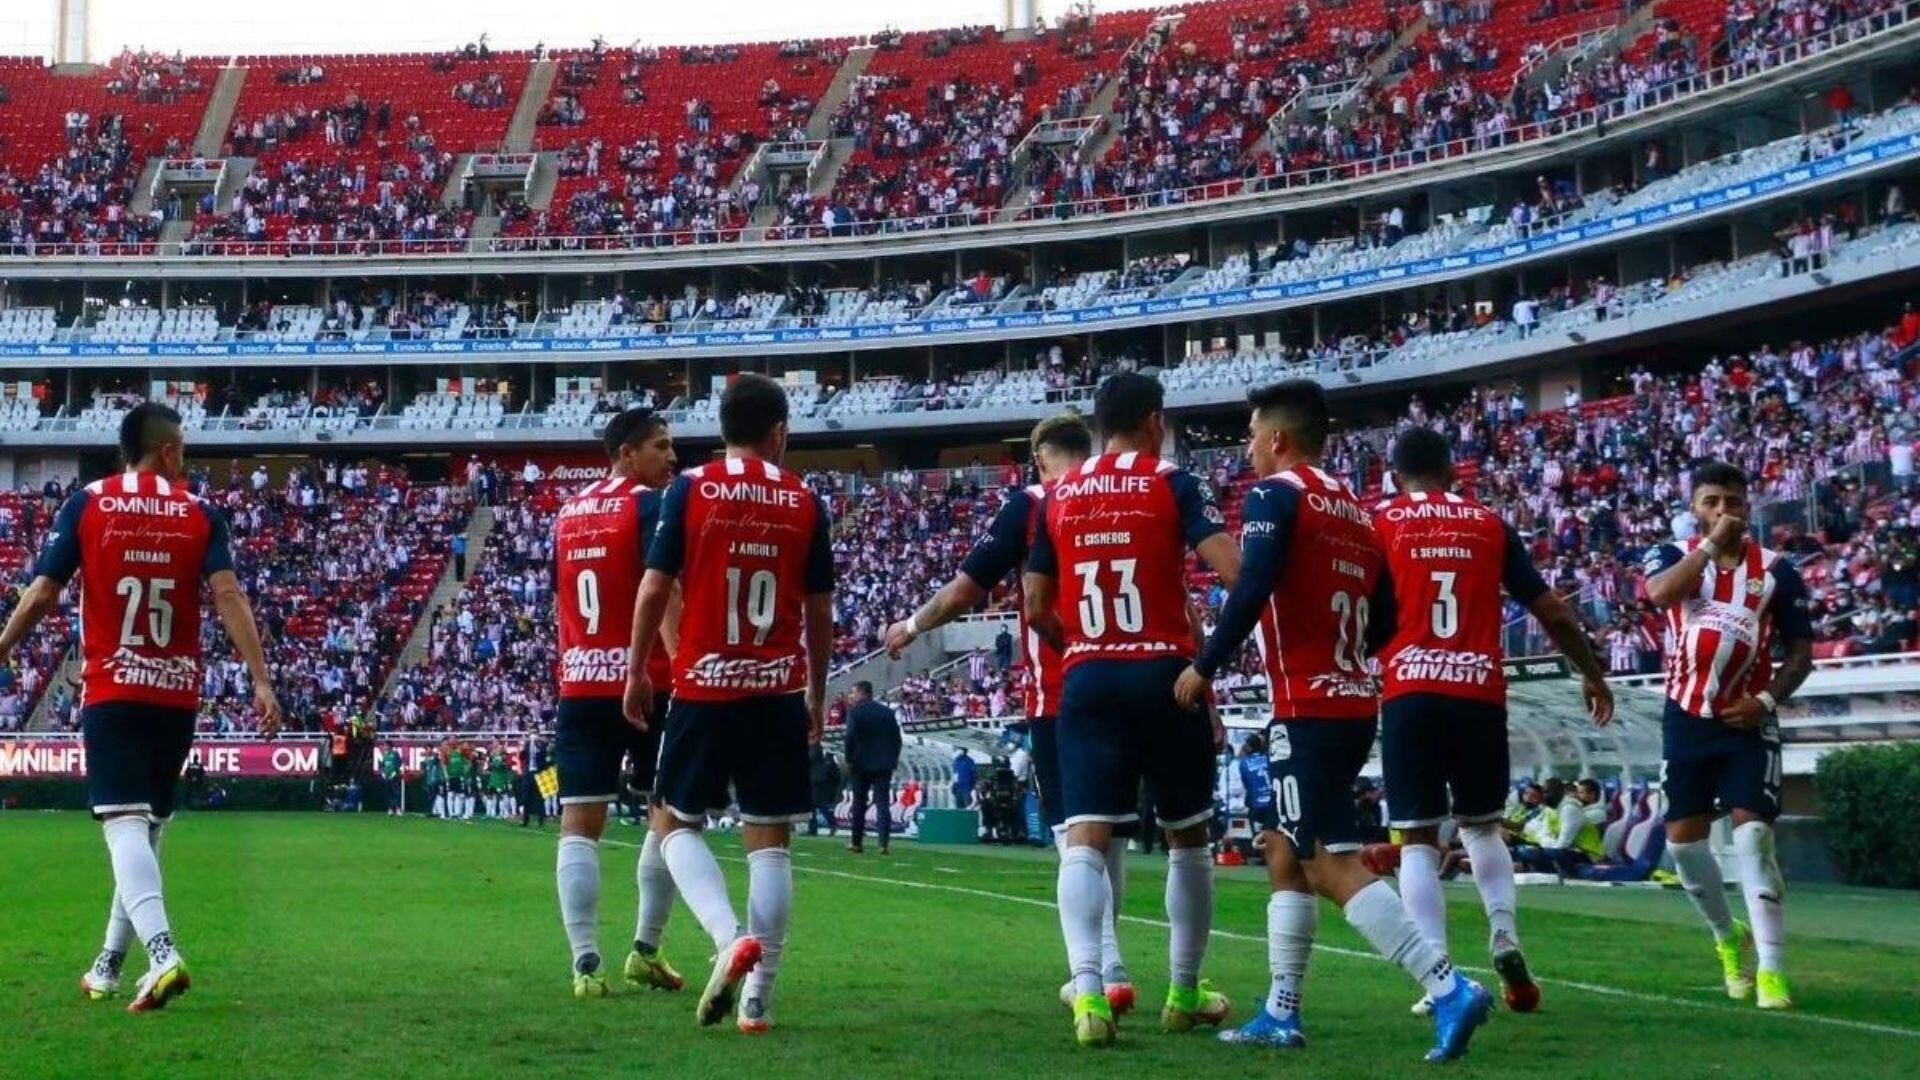 The three Chivas players want to leave El Rebaño after the disappointing performances